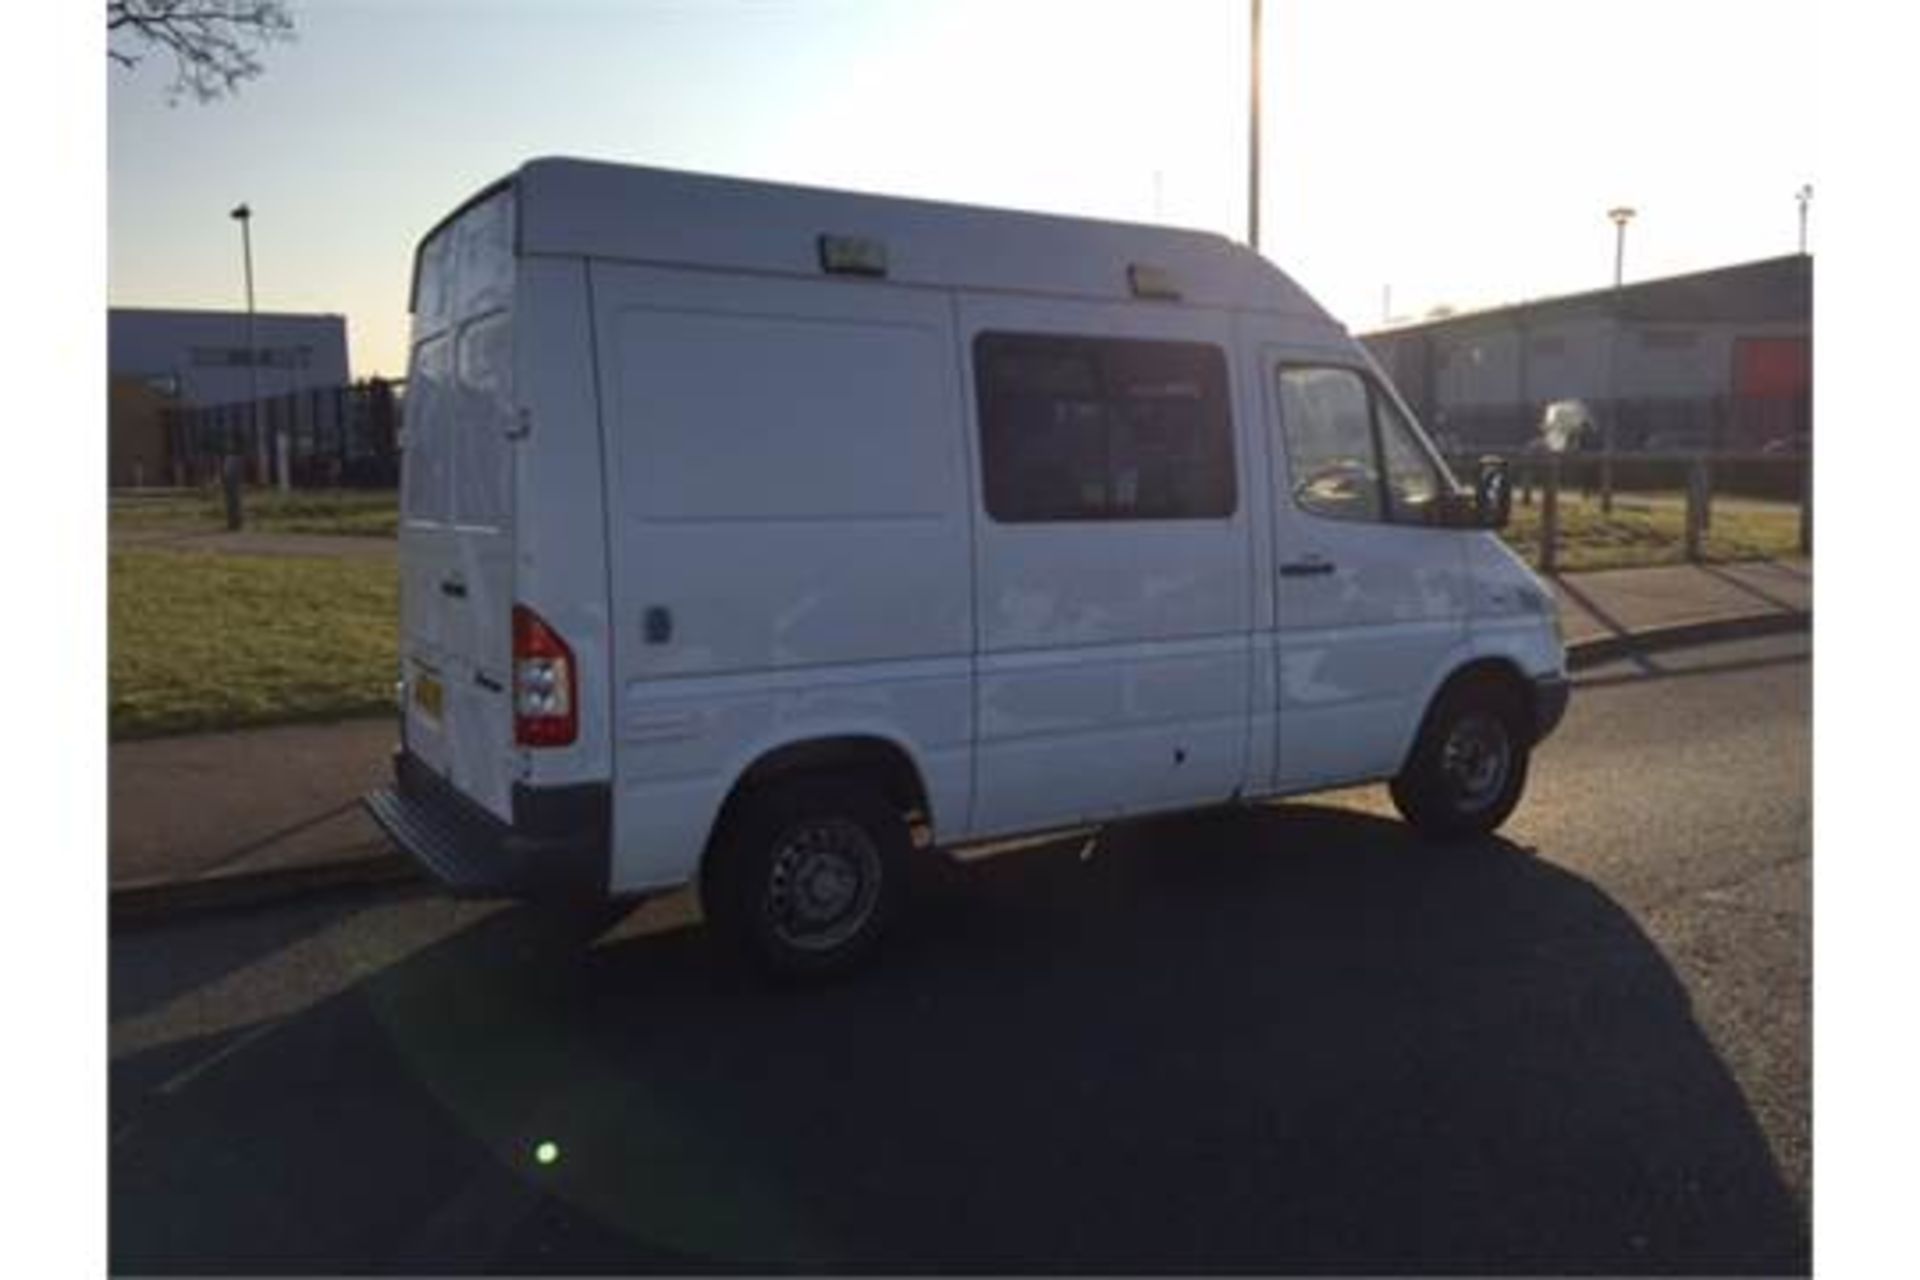 2005 Mercedes Sprinter 311 cdi 2148cc Diesel Van with side windows Owned and used by the police from - Image 4 of 23